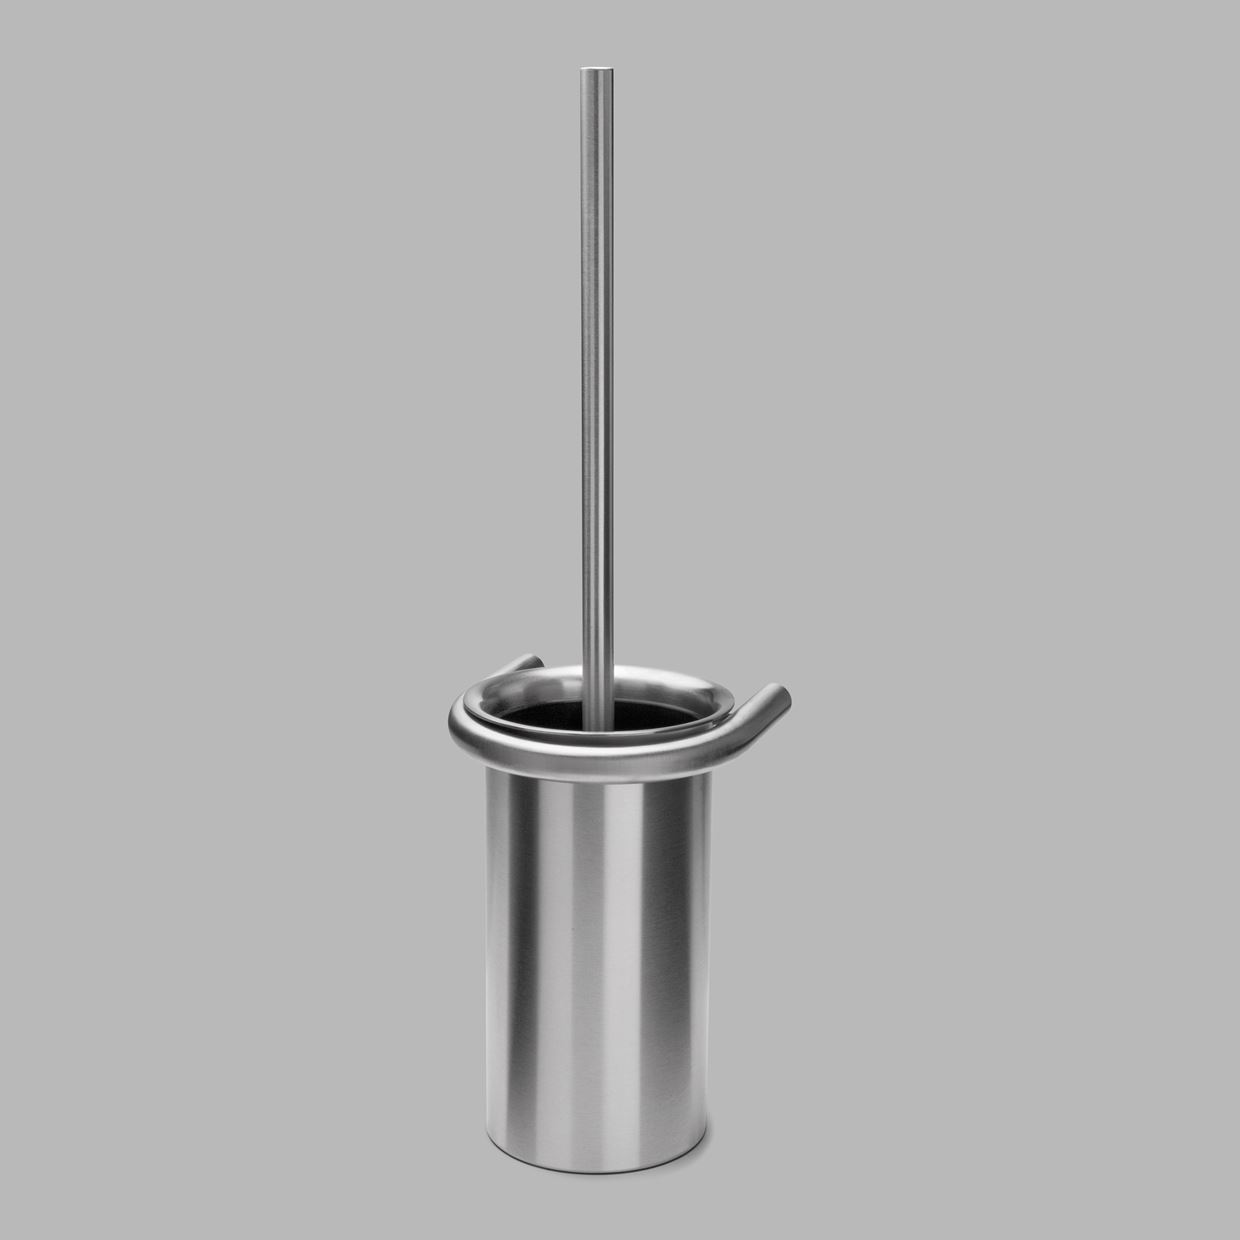 Toilet brush holder, Knud Holscher collection